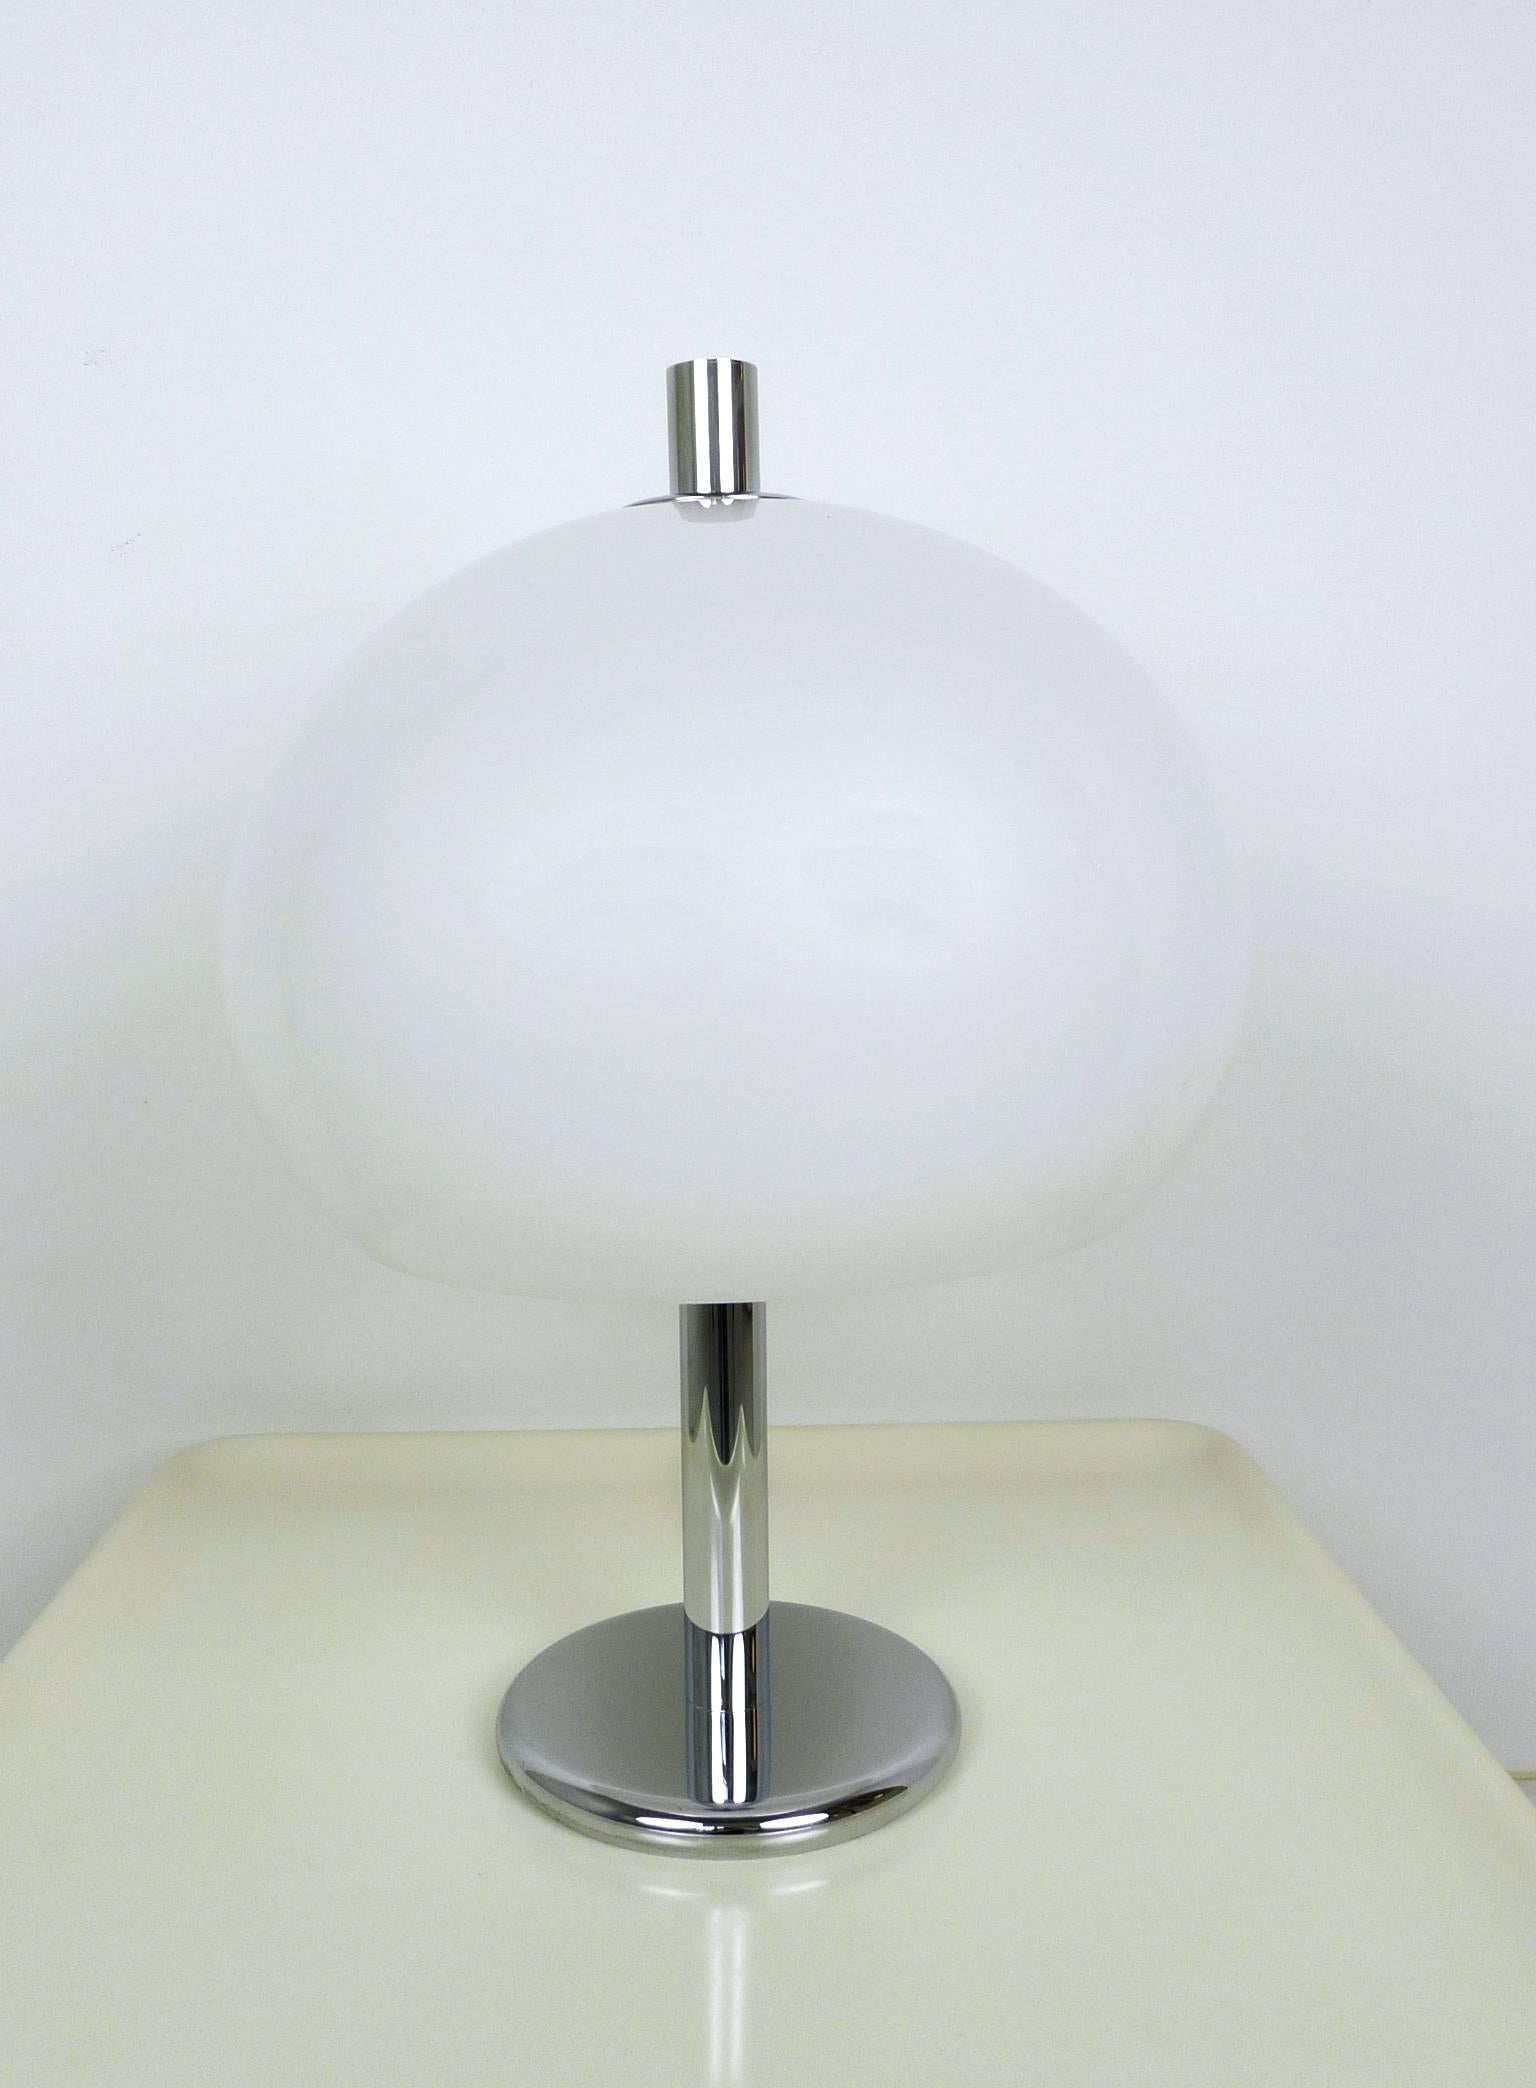 Large 1970s table lamp from Germany. It features a white plastic shade with two E 27 bulb sockets inside and a round chromed base. The lamp is in very good original condition.